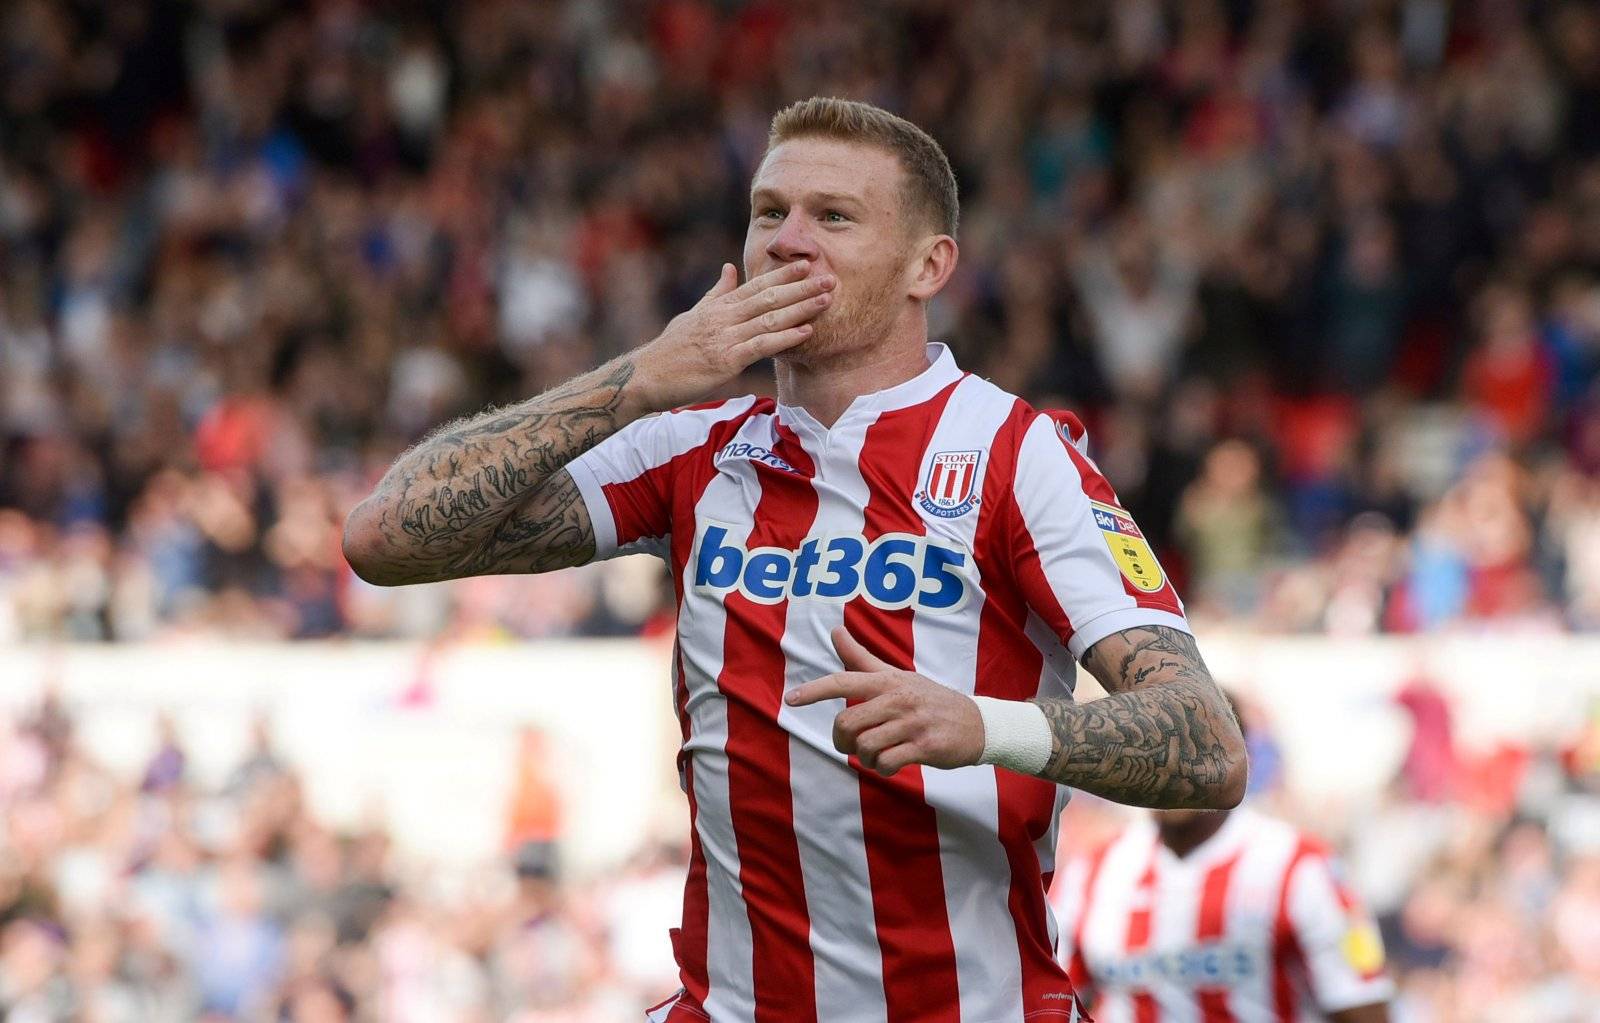 Martin O'Neill keen to reunite with James McClean at Nottingham Forest - Transfer Rumours